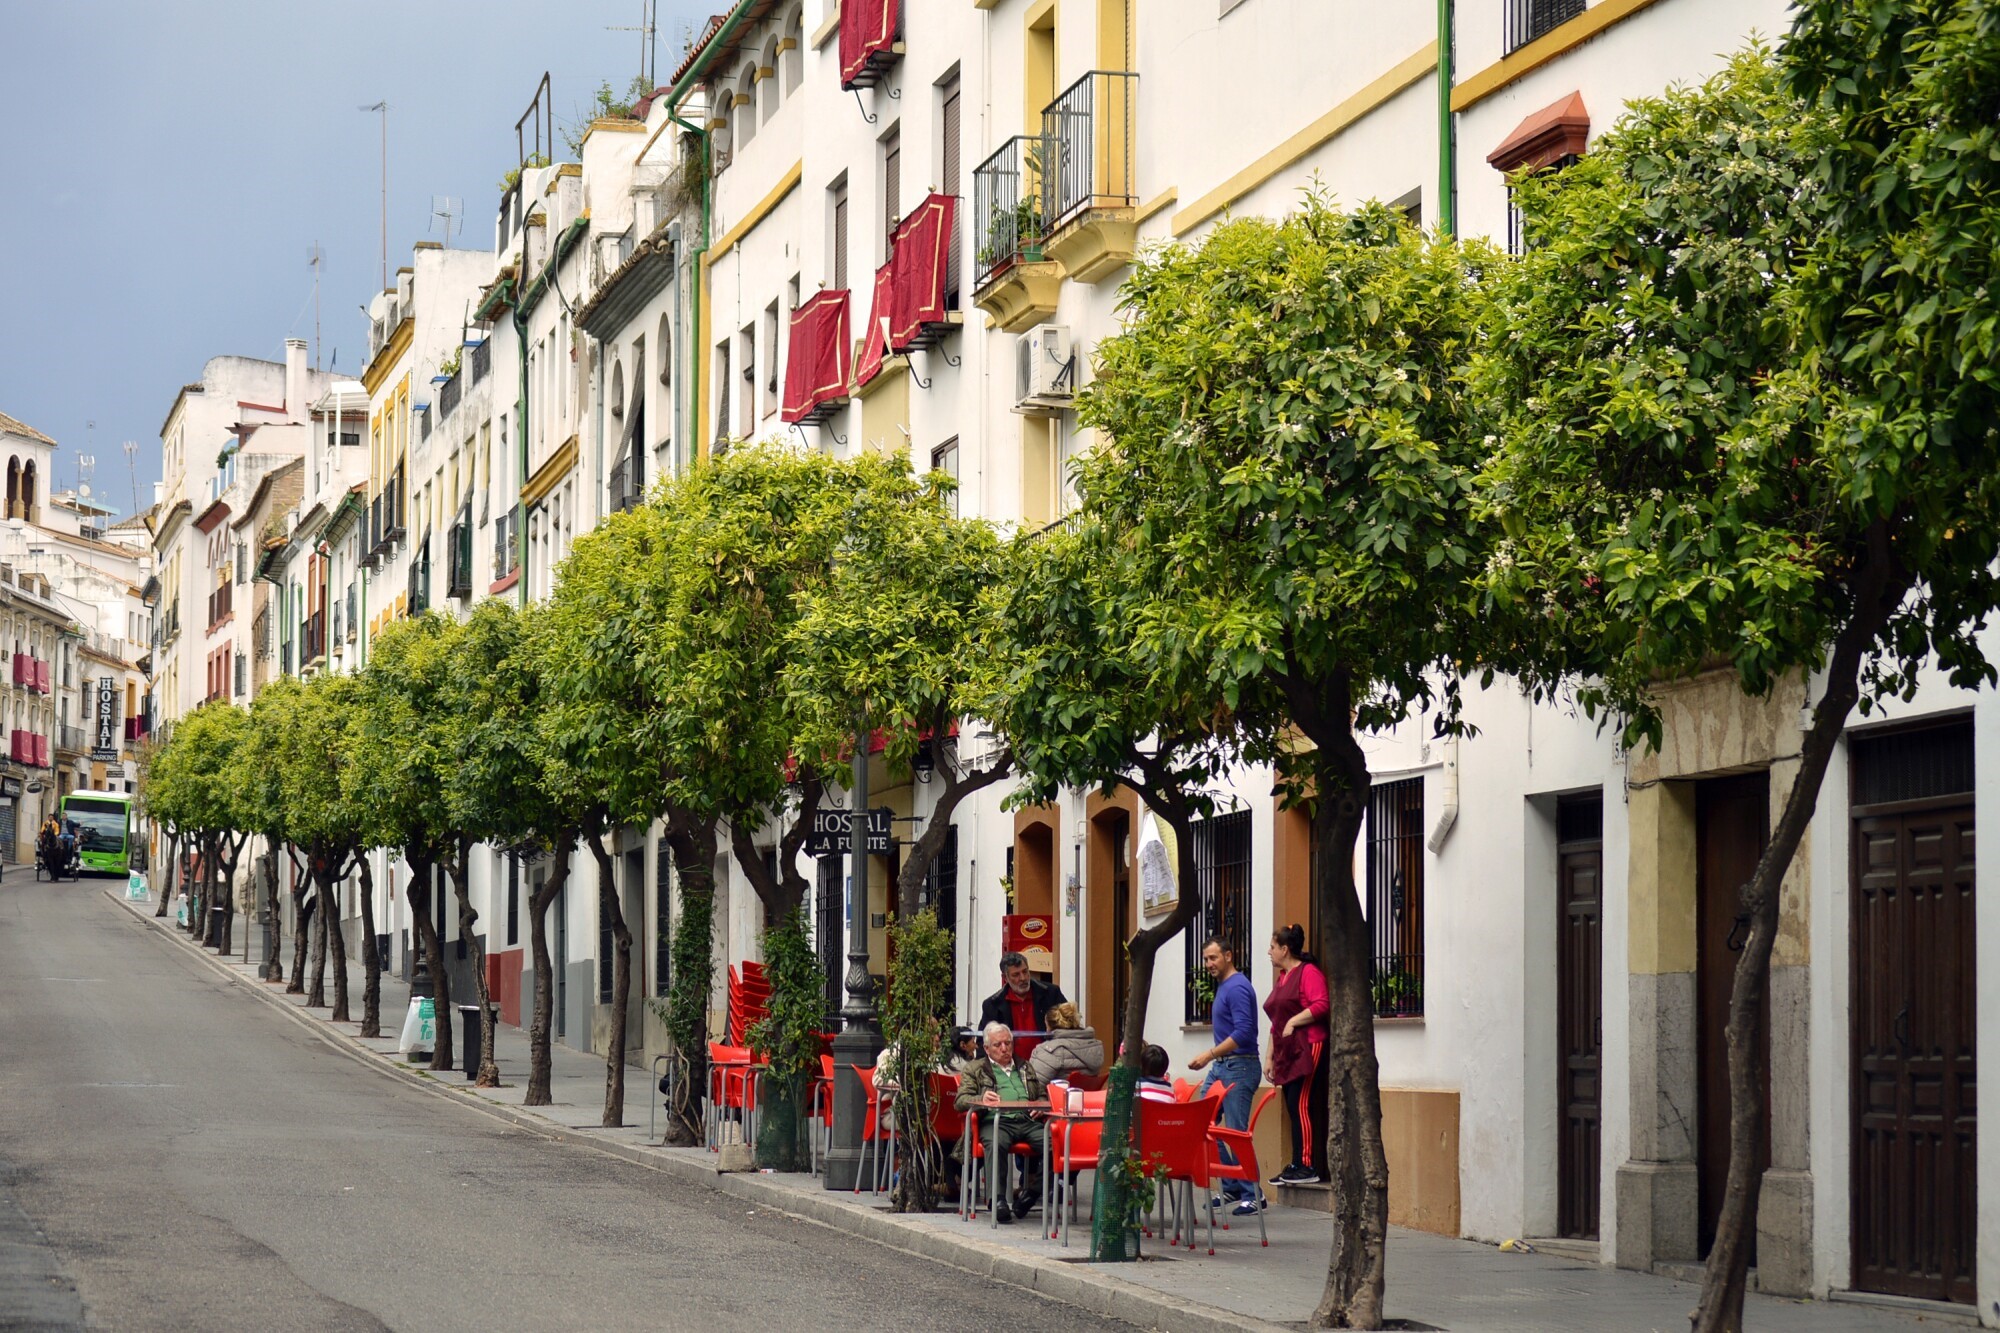 Moving to Spain: How to Make the Most of Spanish Property Laws